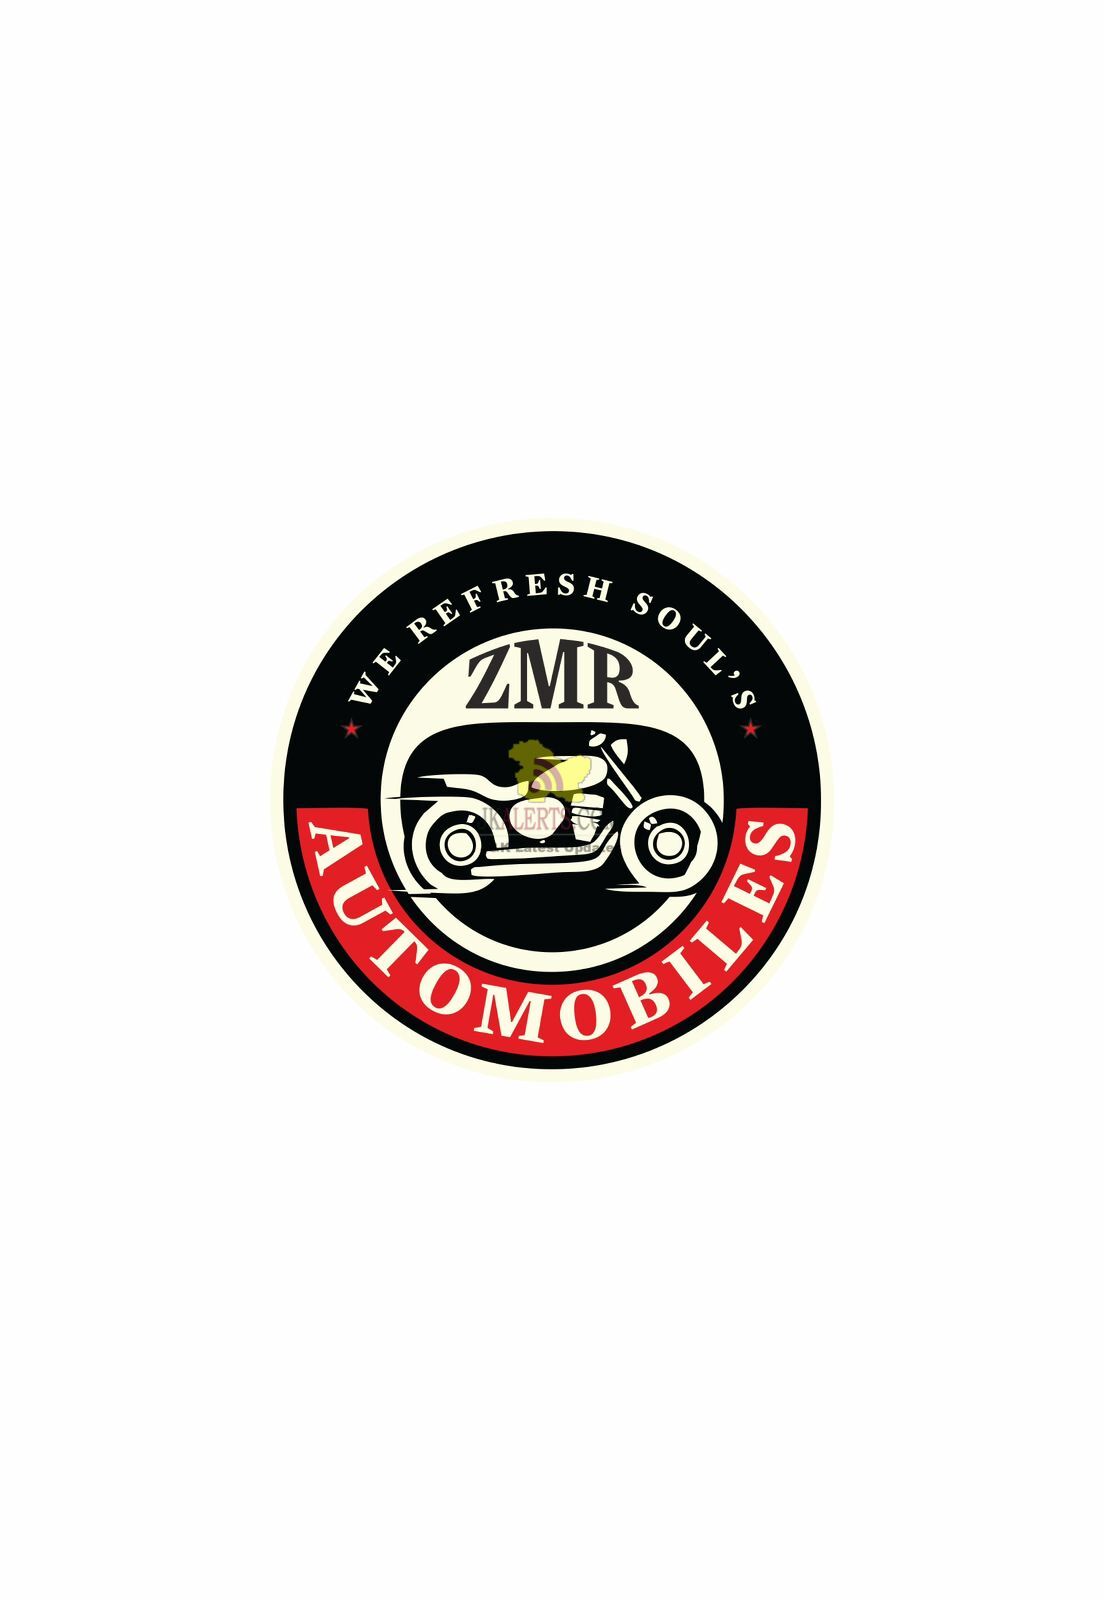 Jobs in Royal Enfield Motorcycles ZMR Automobiles.